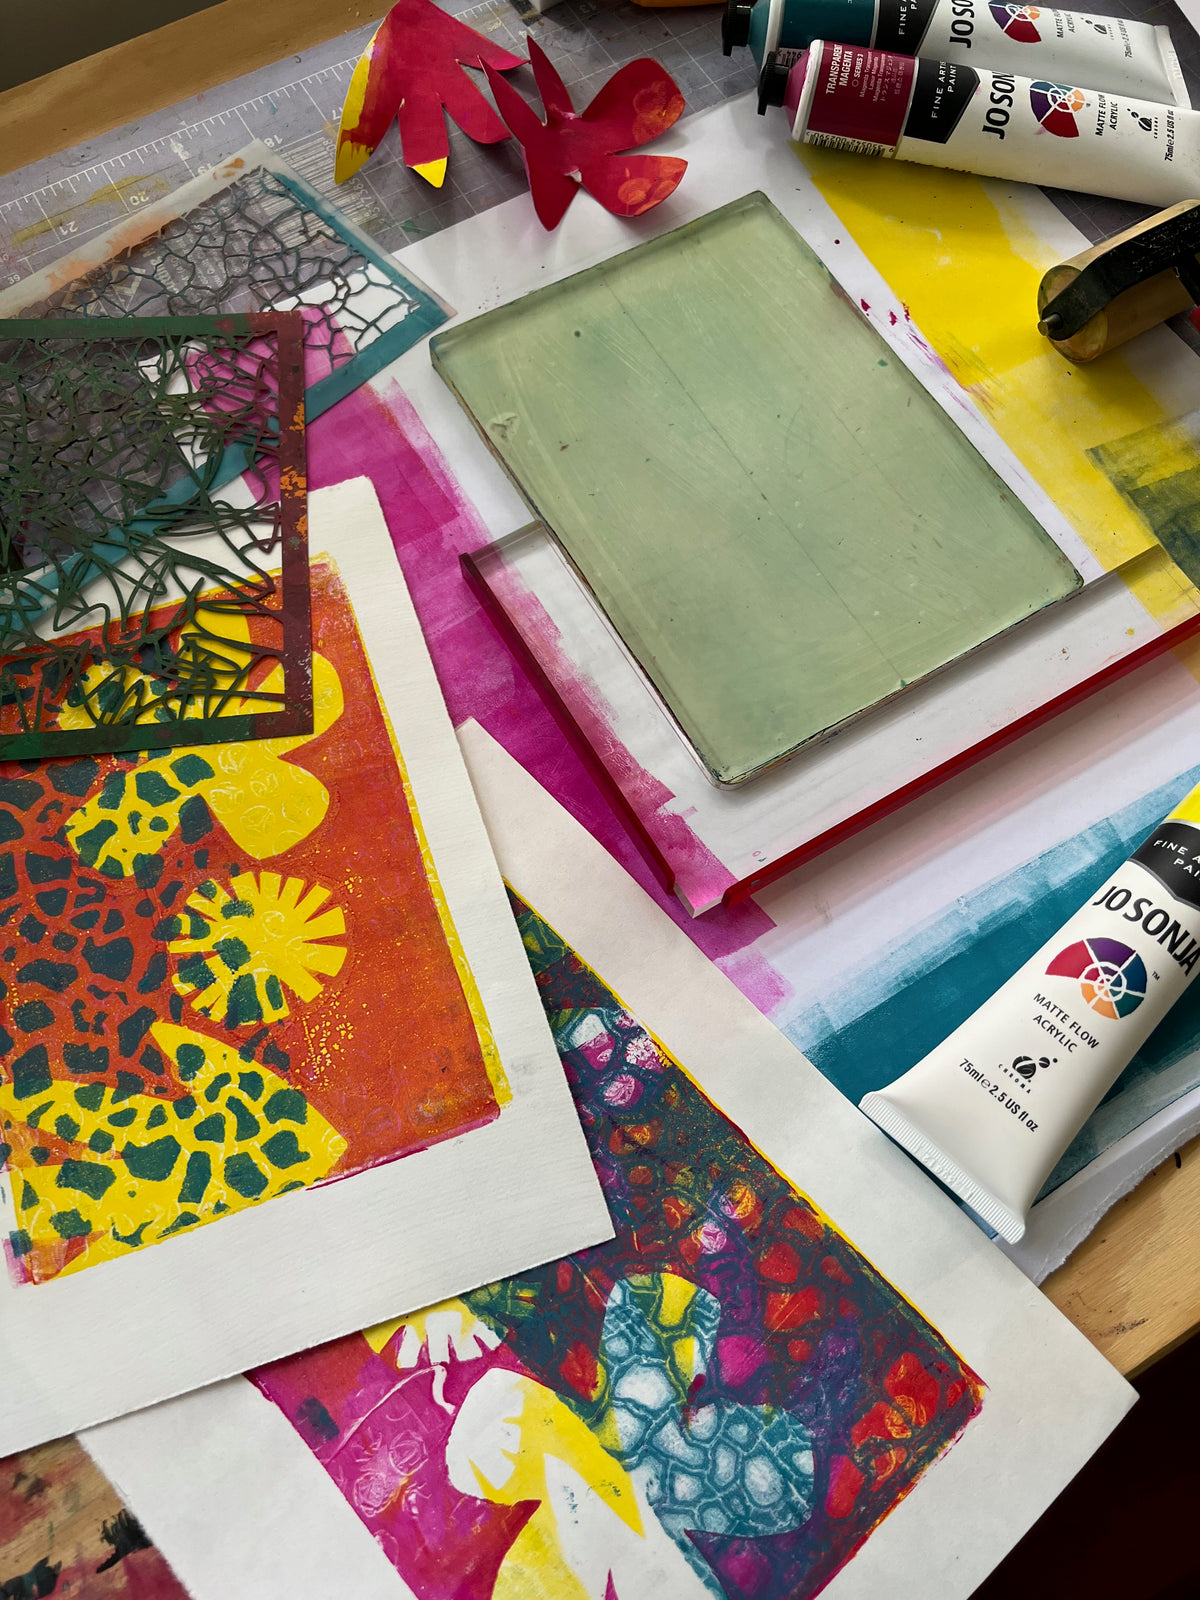 Make your own stamps AND play with gel printing! - March 9,  West Ryde